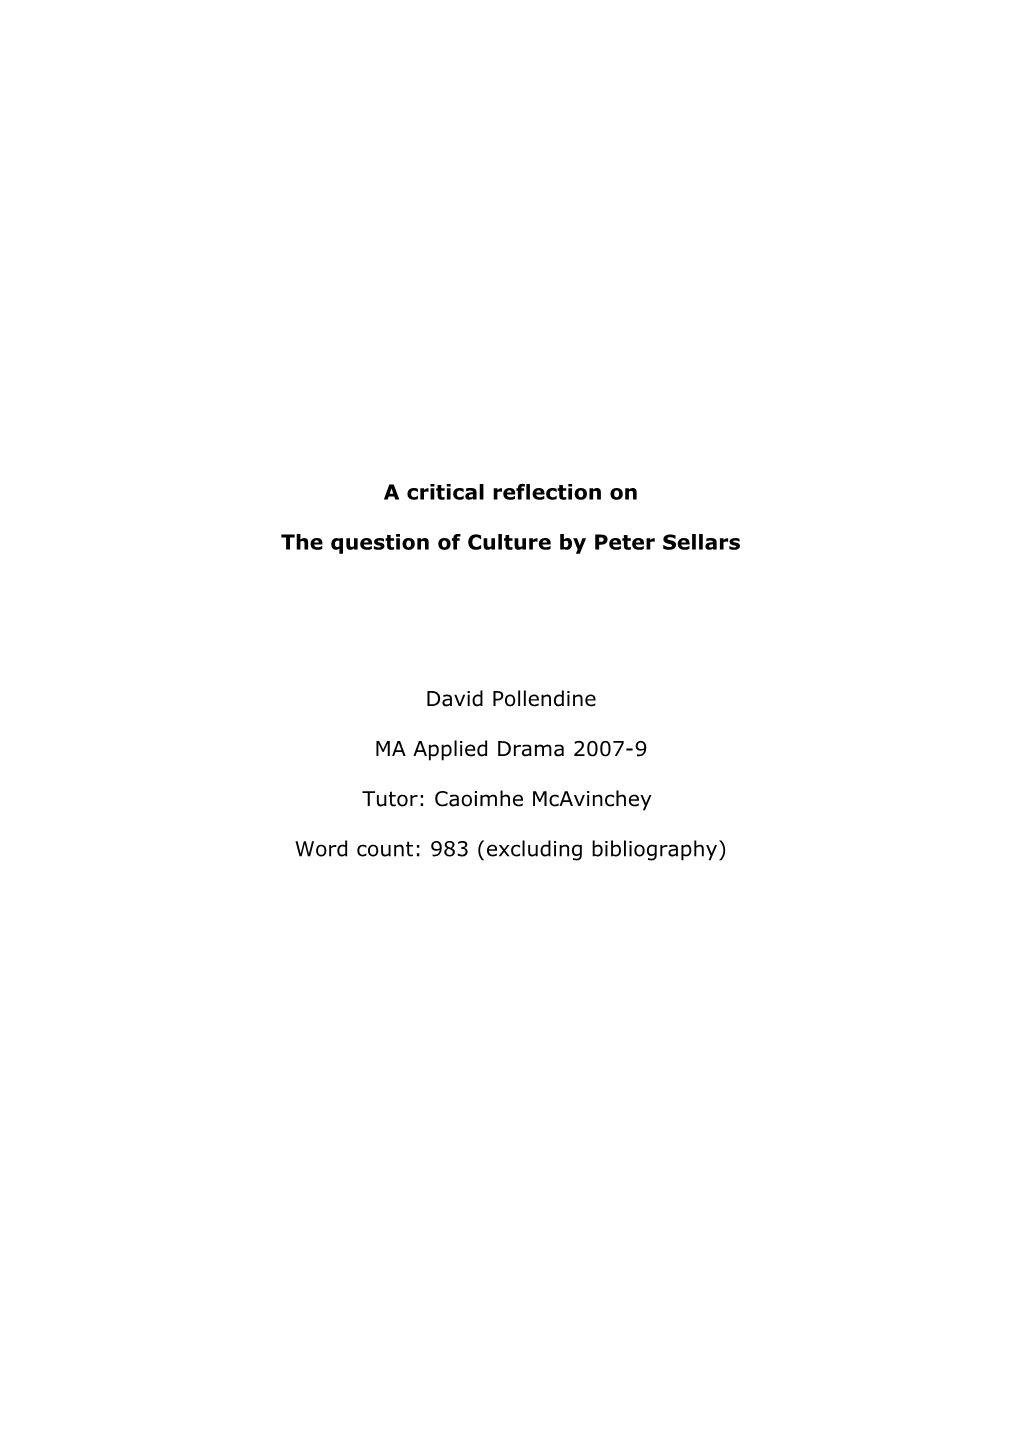 The Question of Culture by Peter Sellars - a Critique